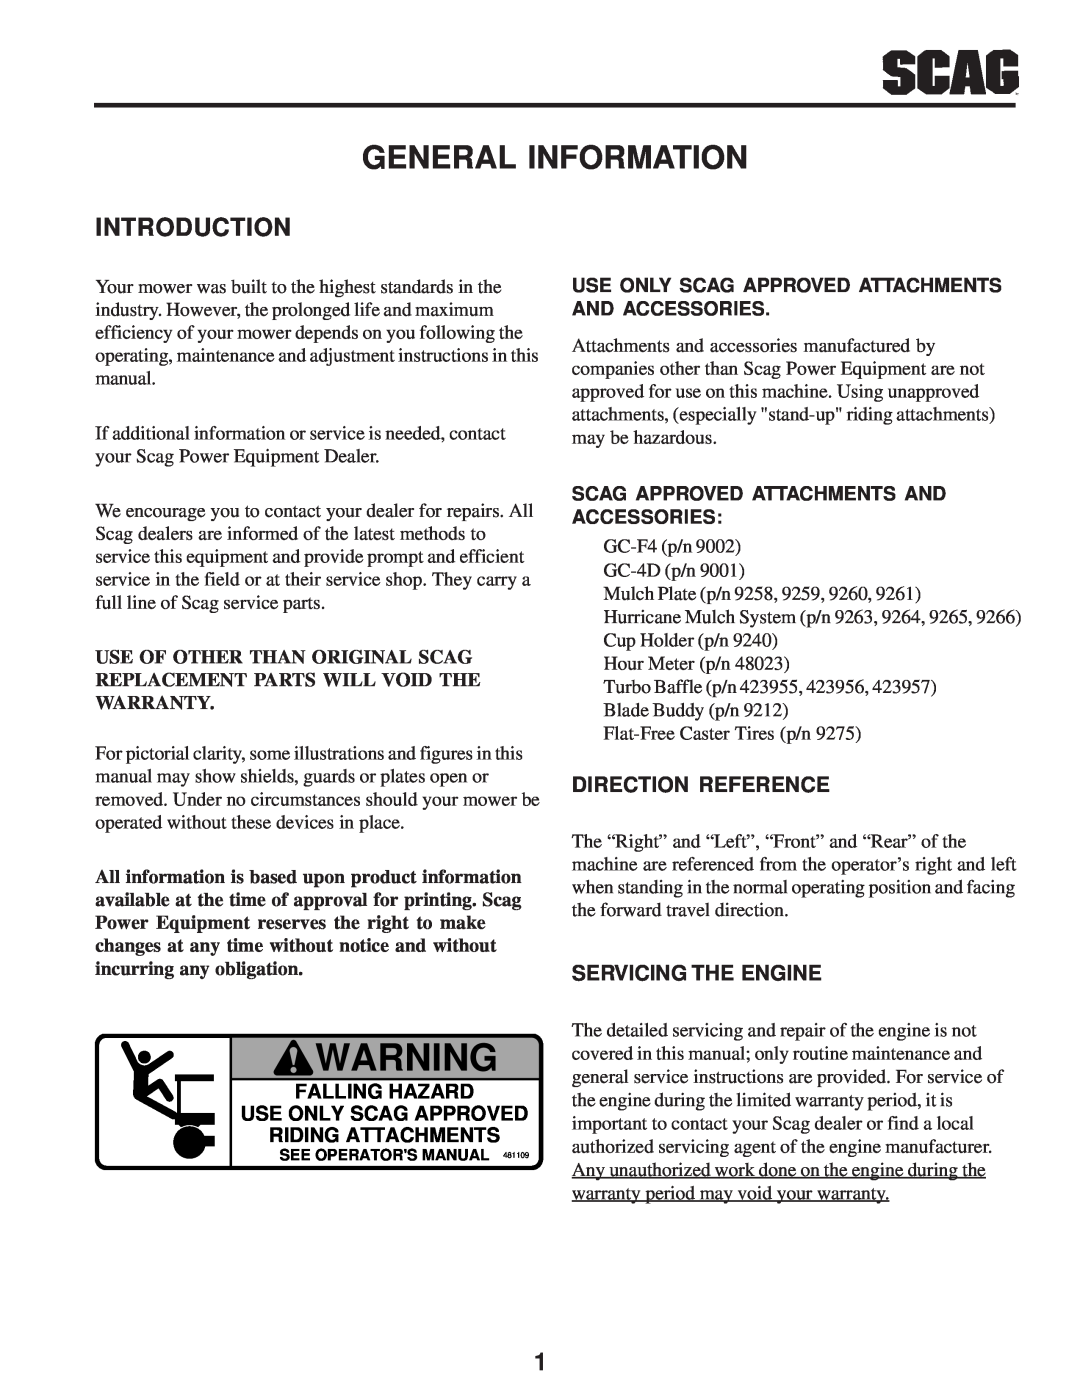 Scag Power Equipment SW manual General Information, Direction Reference, Servicing The Engine, Riding Attachments 